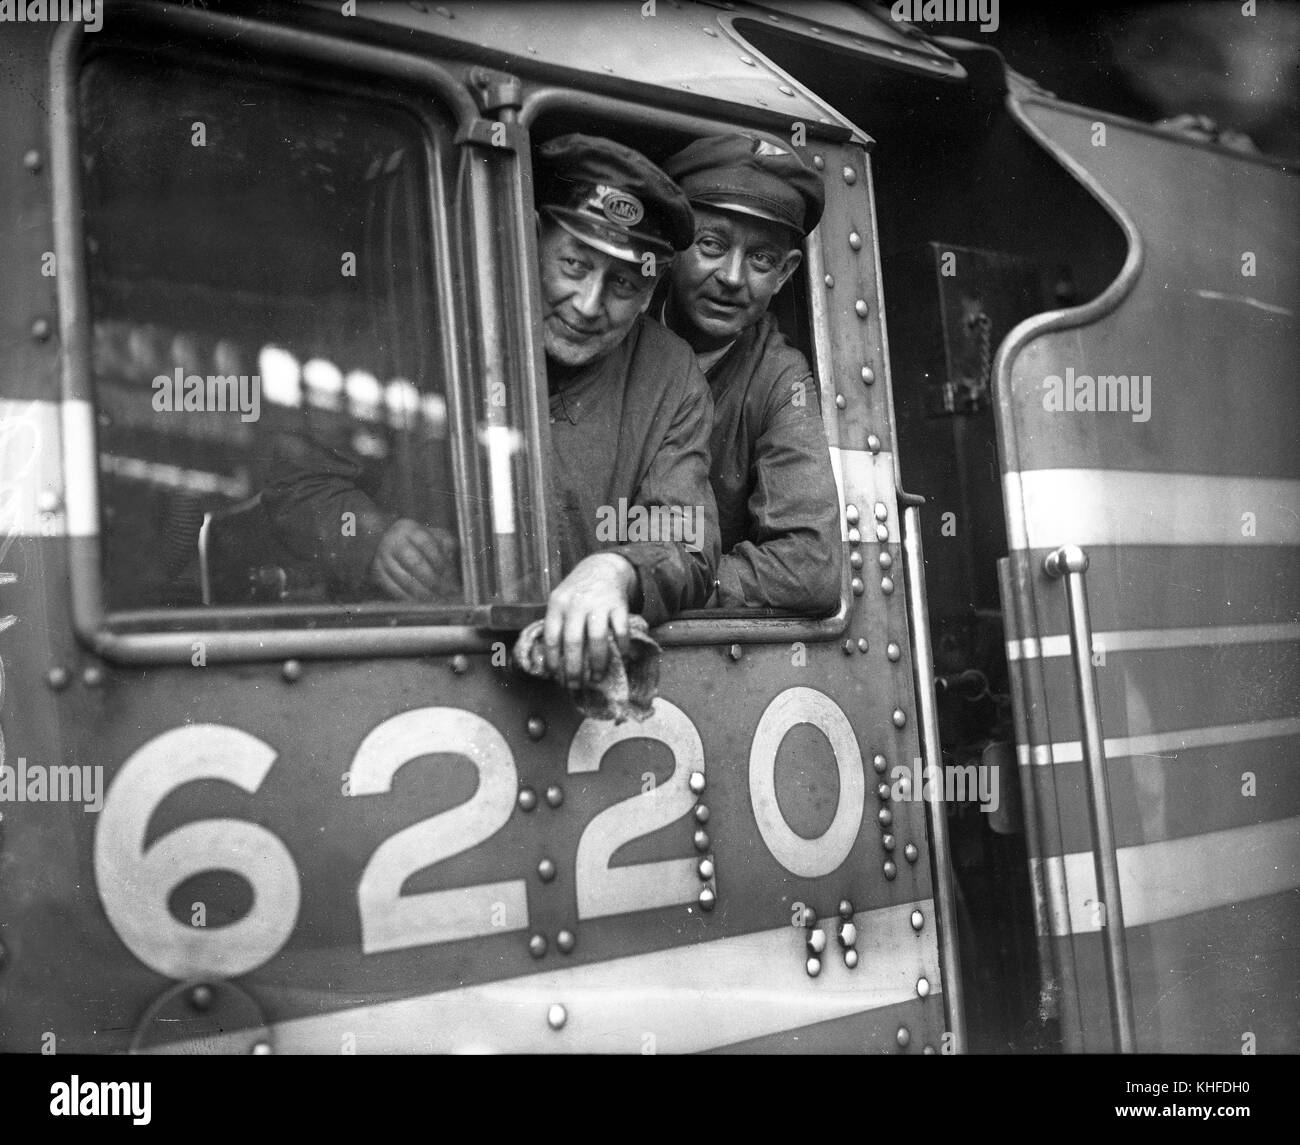 Record breaking train crew Driver TJ. Clarke and fireman C. Lewis on the footplate of the LMS steam locomotive Princess Coronation Class No. 6220 after setting a new speed record of 114 mph on 29 June 1937 Stock Photo